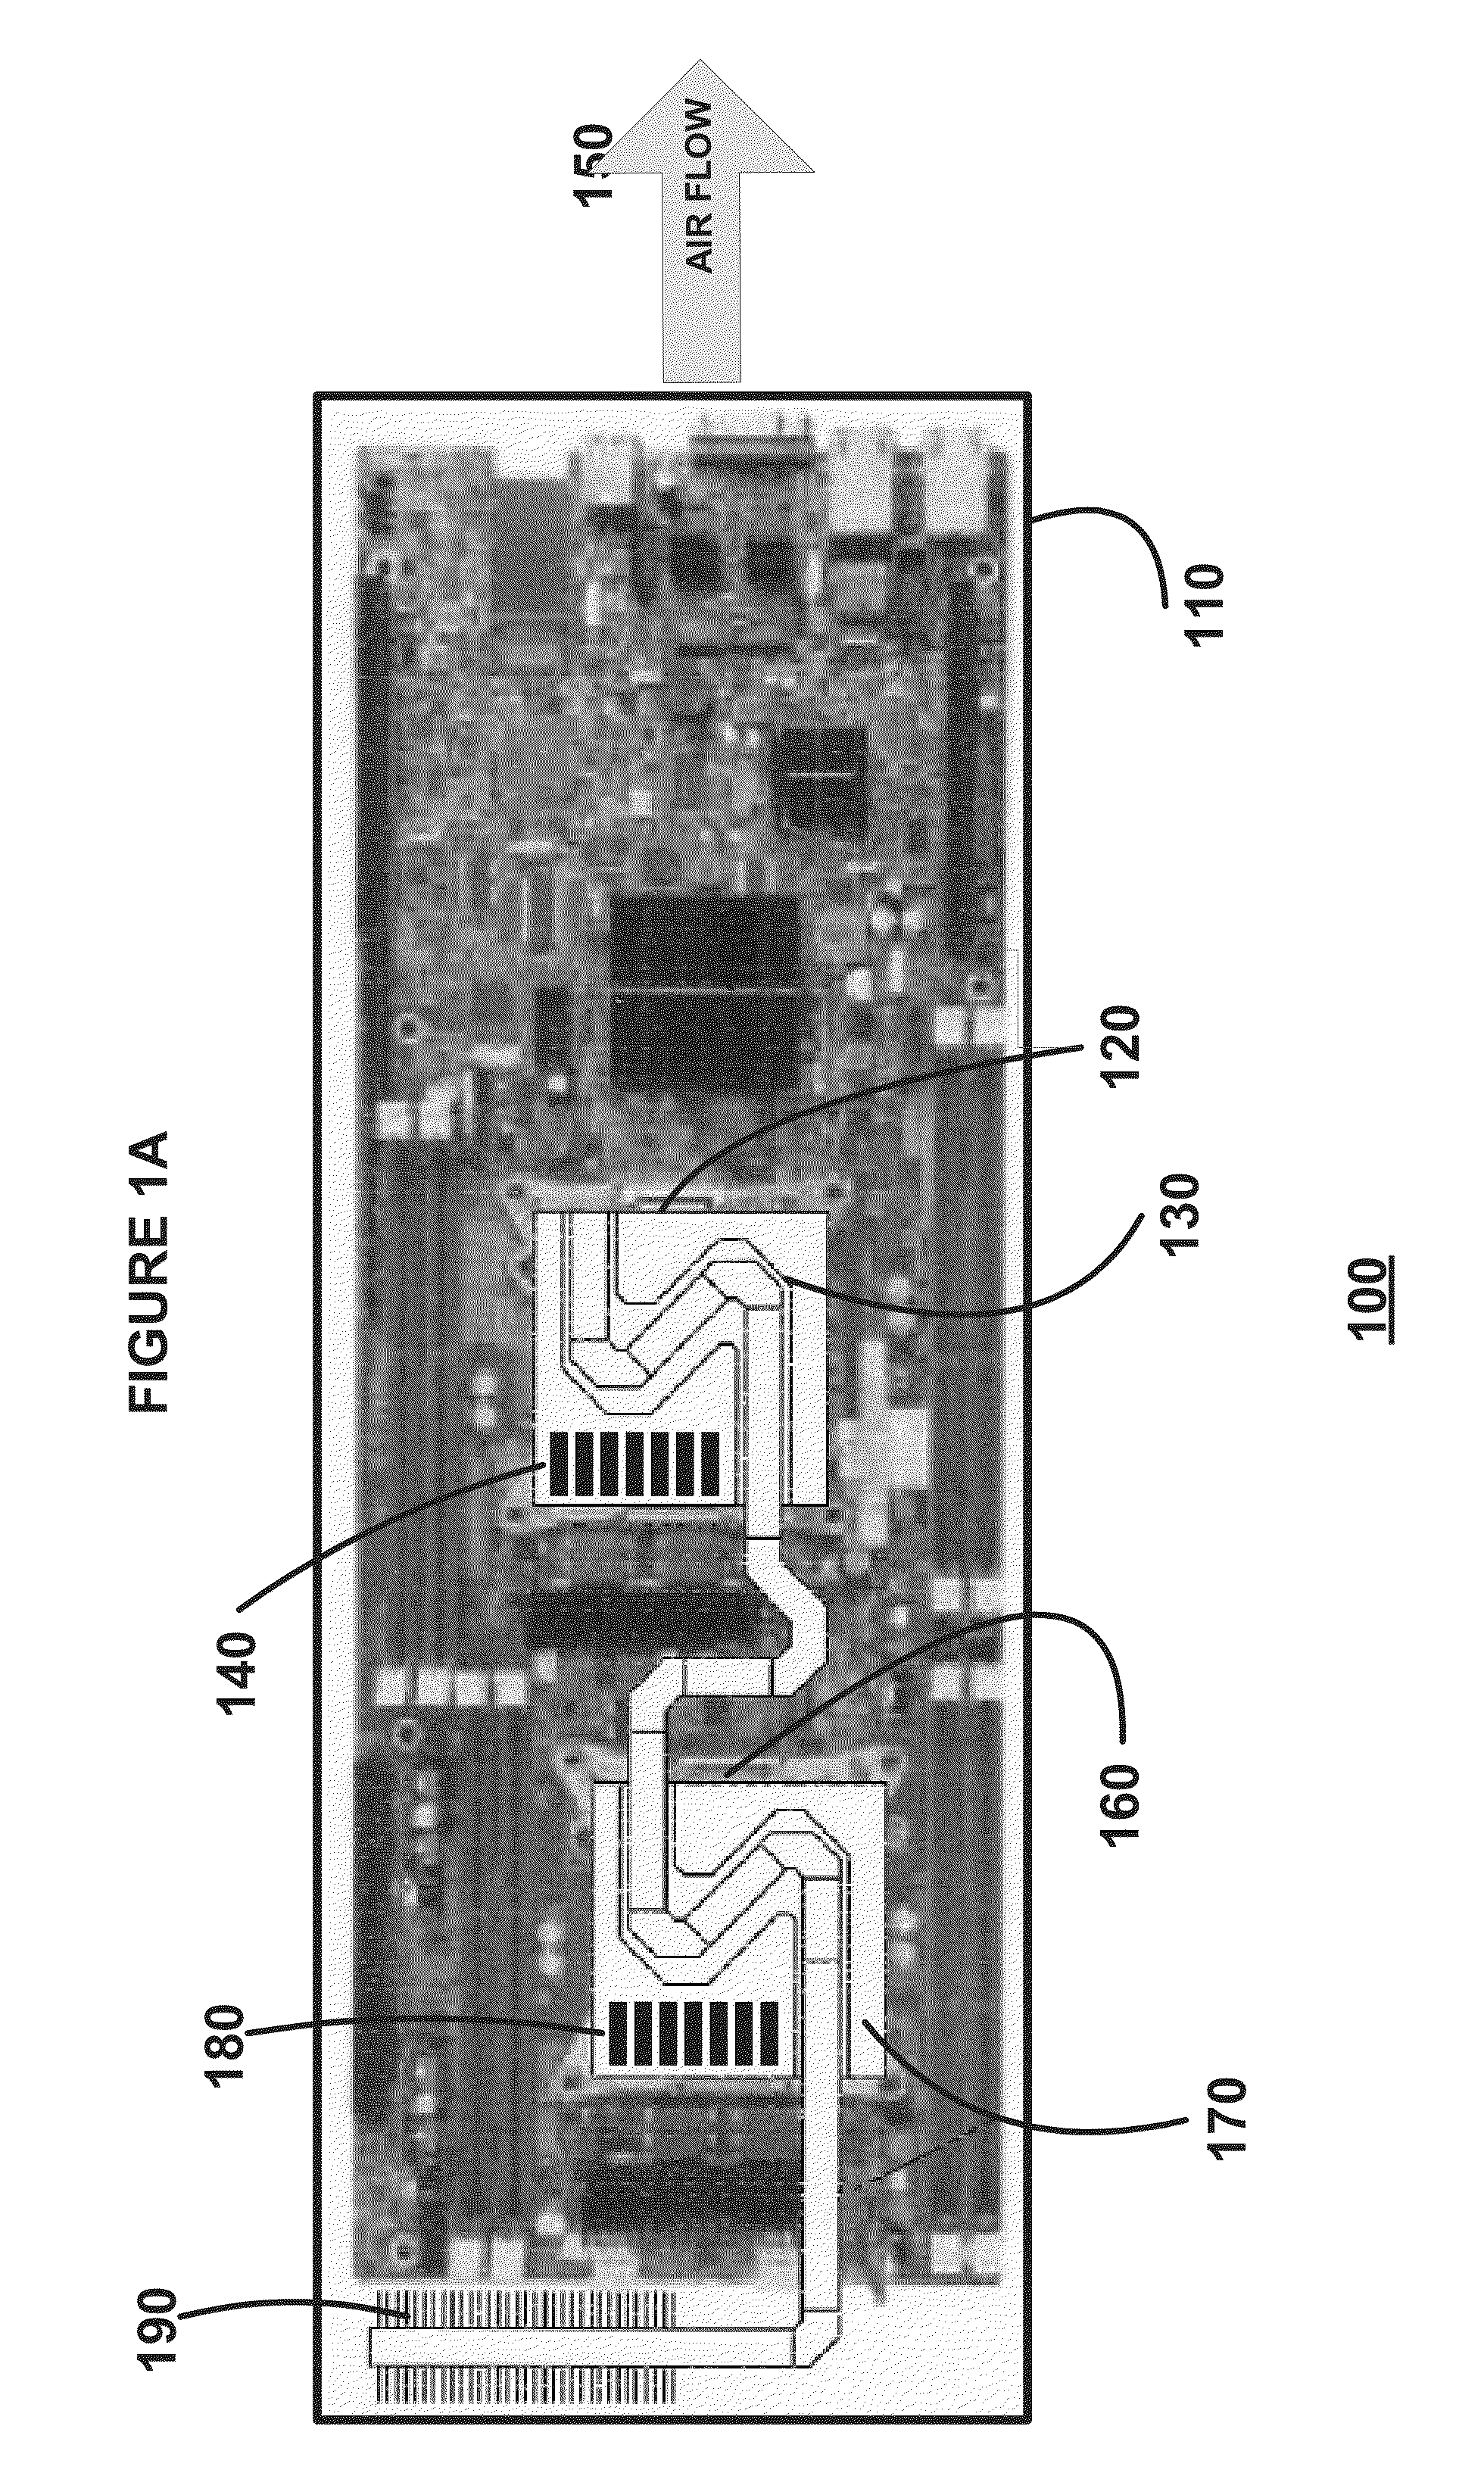 System for cooling multiple in-line central processing units in a confined enclosure